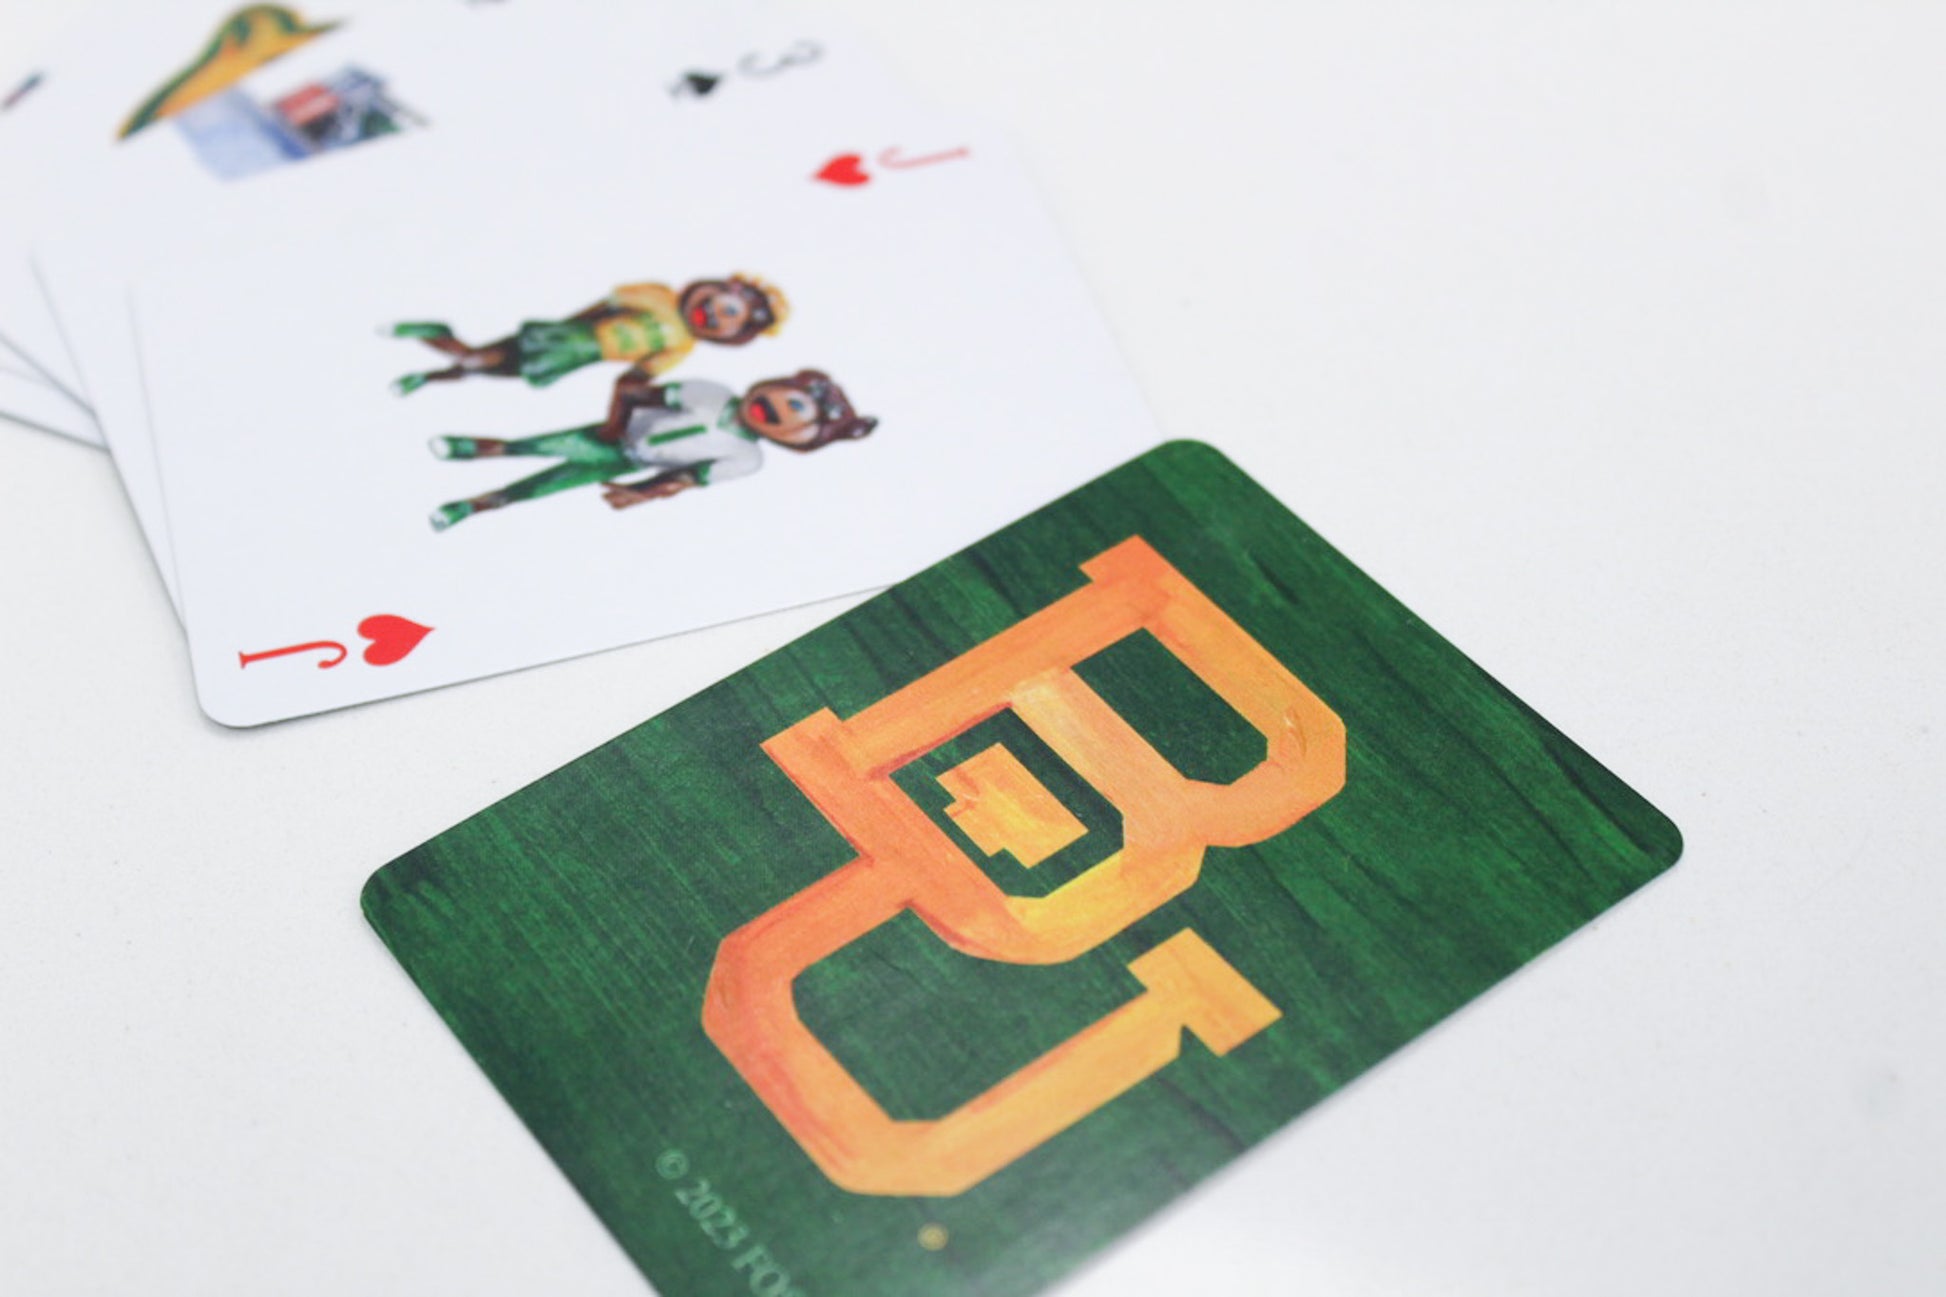 Baylor Playing cArds by FOSTER